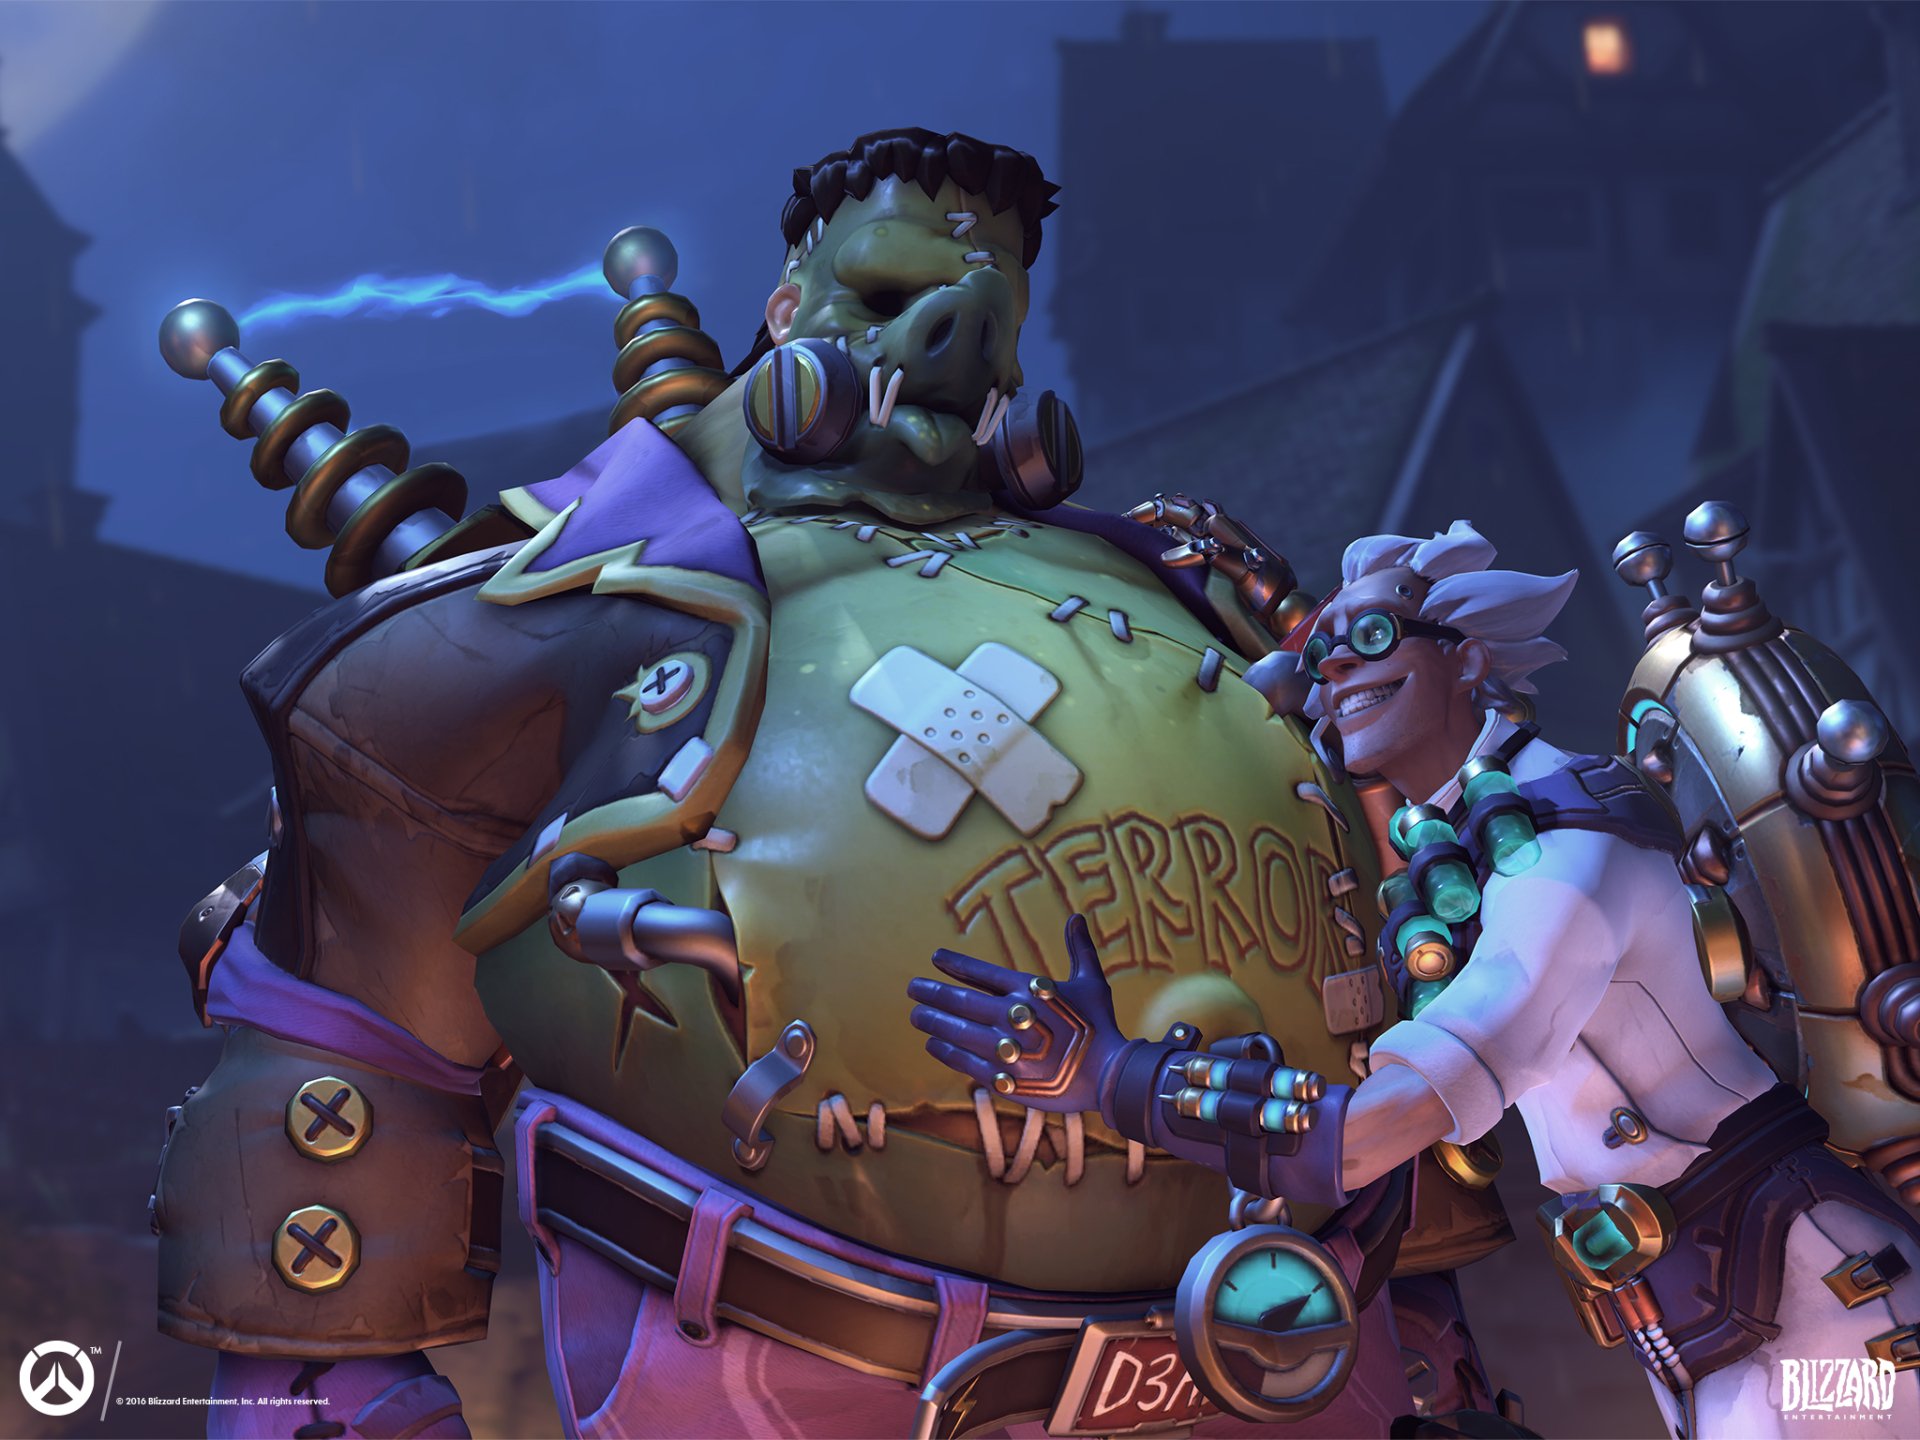 Dr Junkenstein And The Monster HD Wallpaper Background Image.